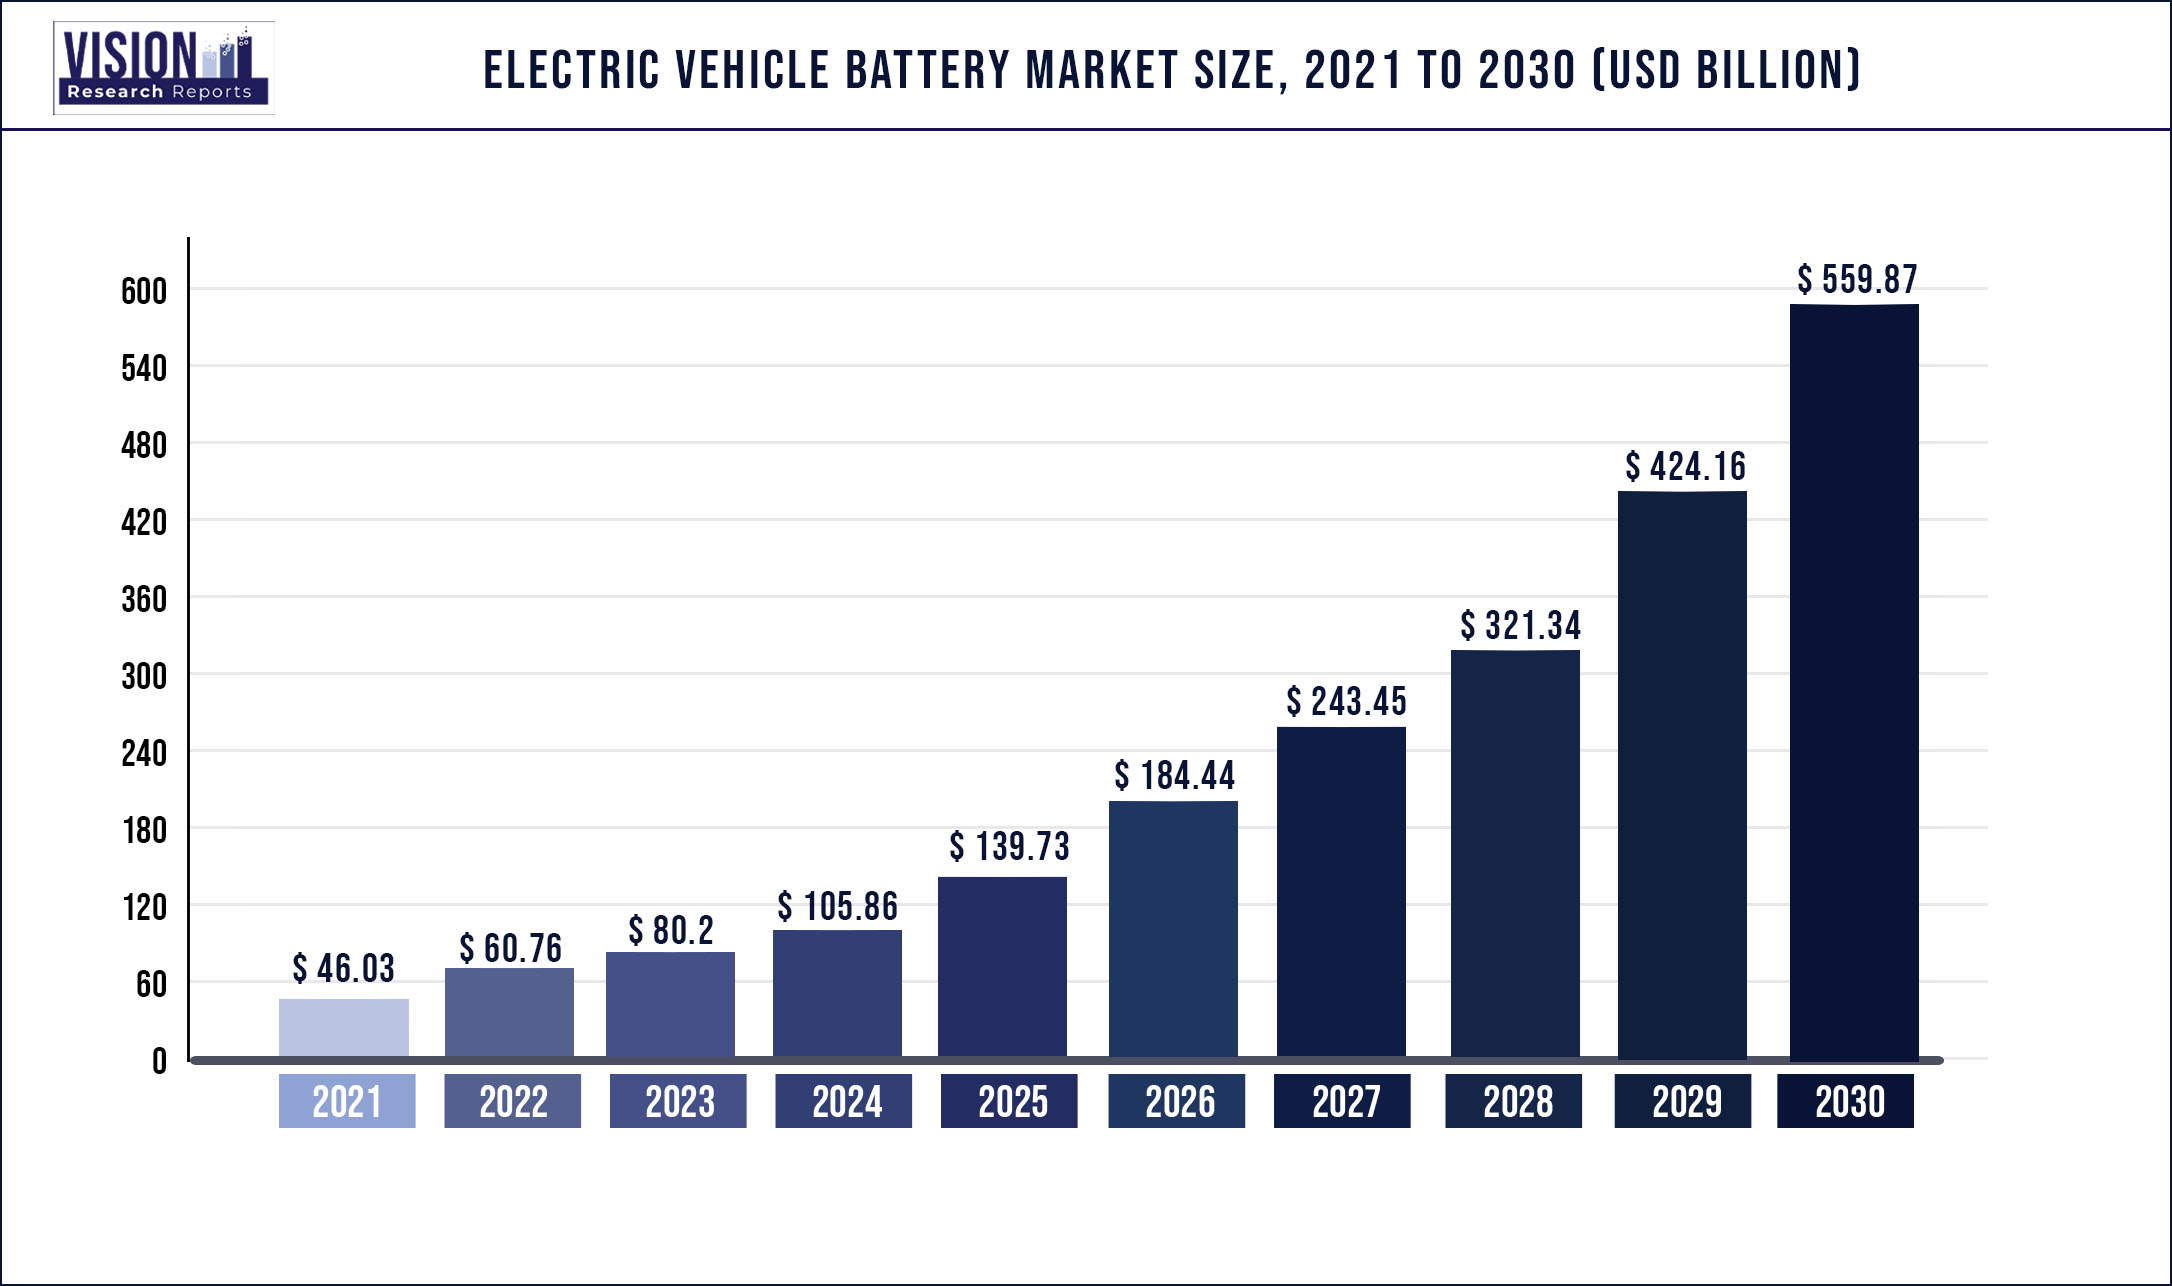 Electric Vehicle Battery Market Size 2021 to 2030